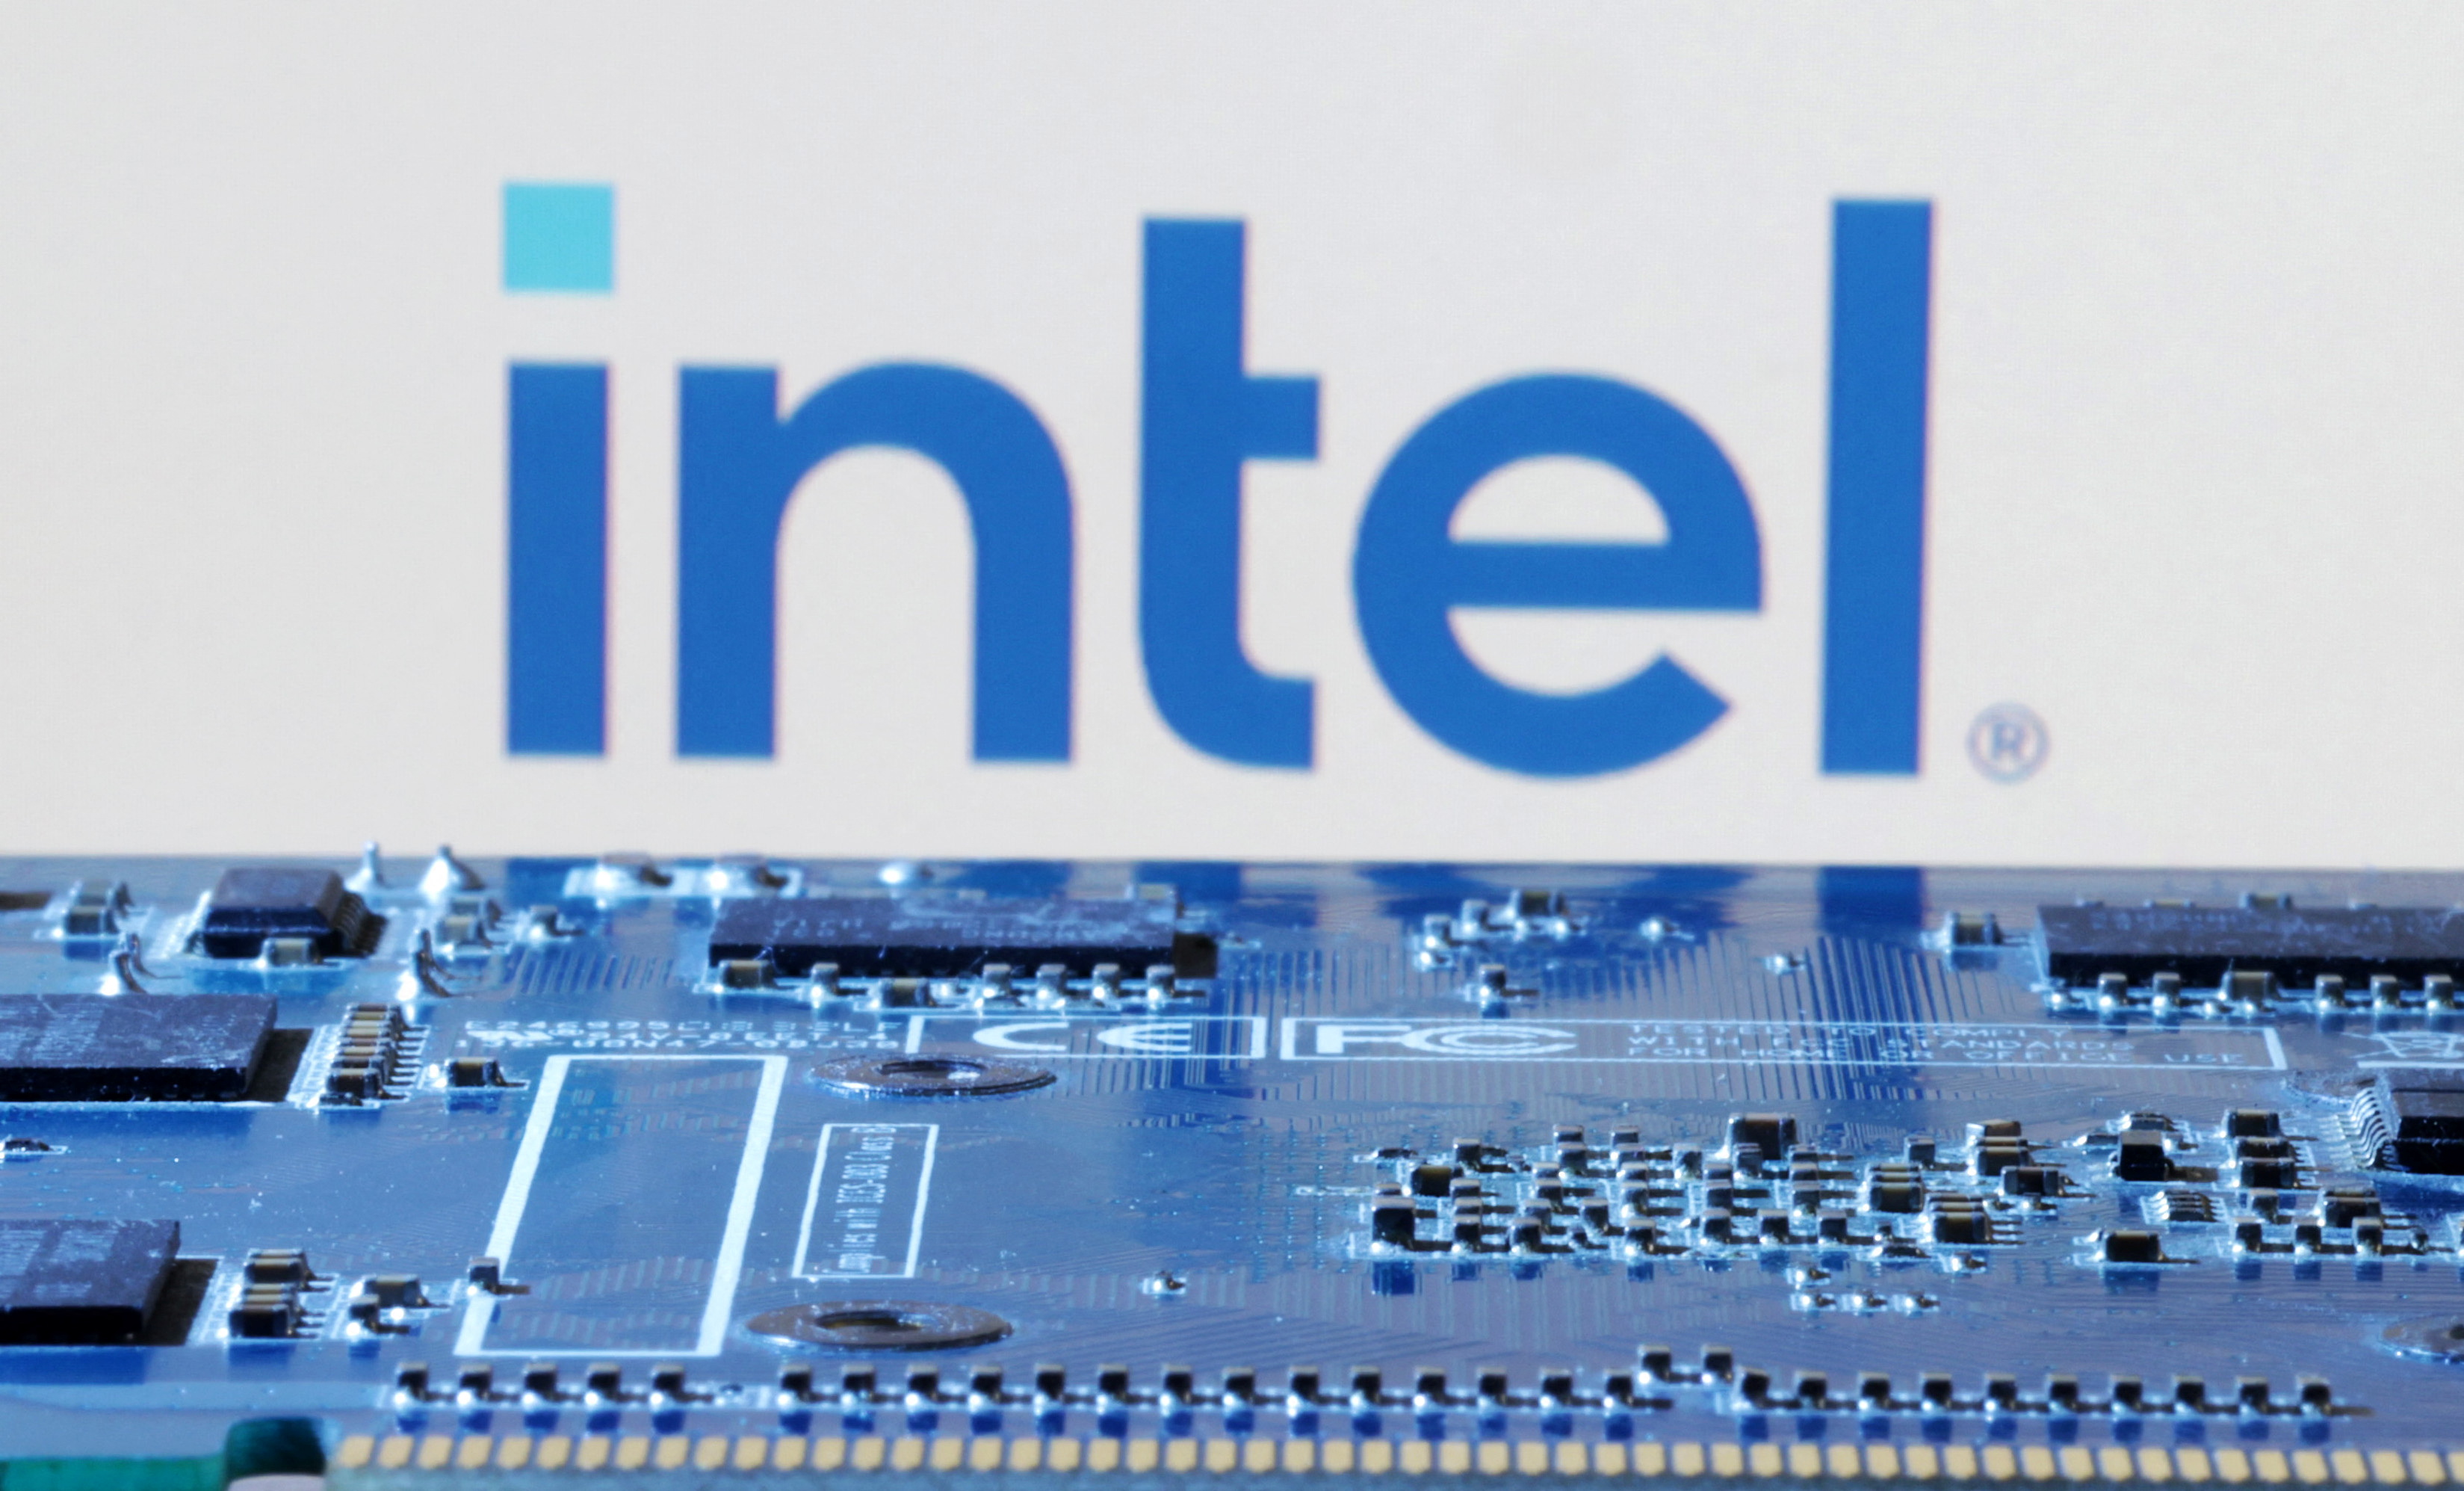 Intel reports better than expected Q1 earnings, but falls short on revenue outlook. Stock slides more than 5%